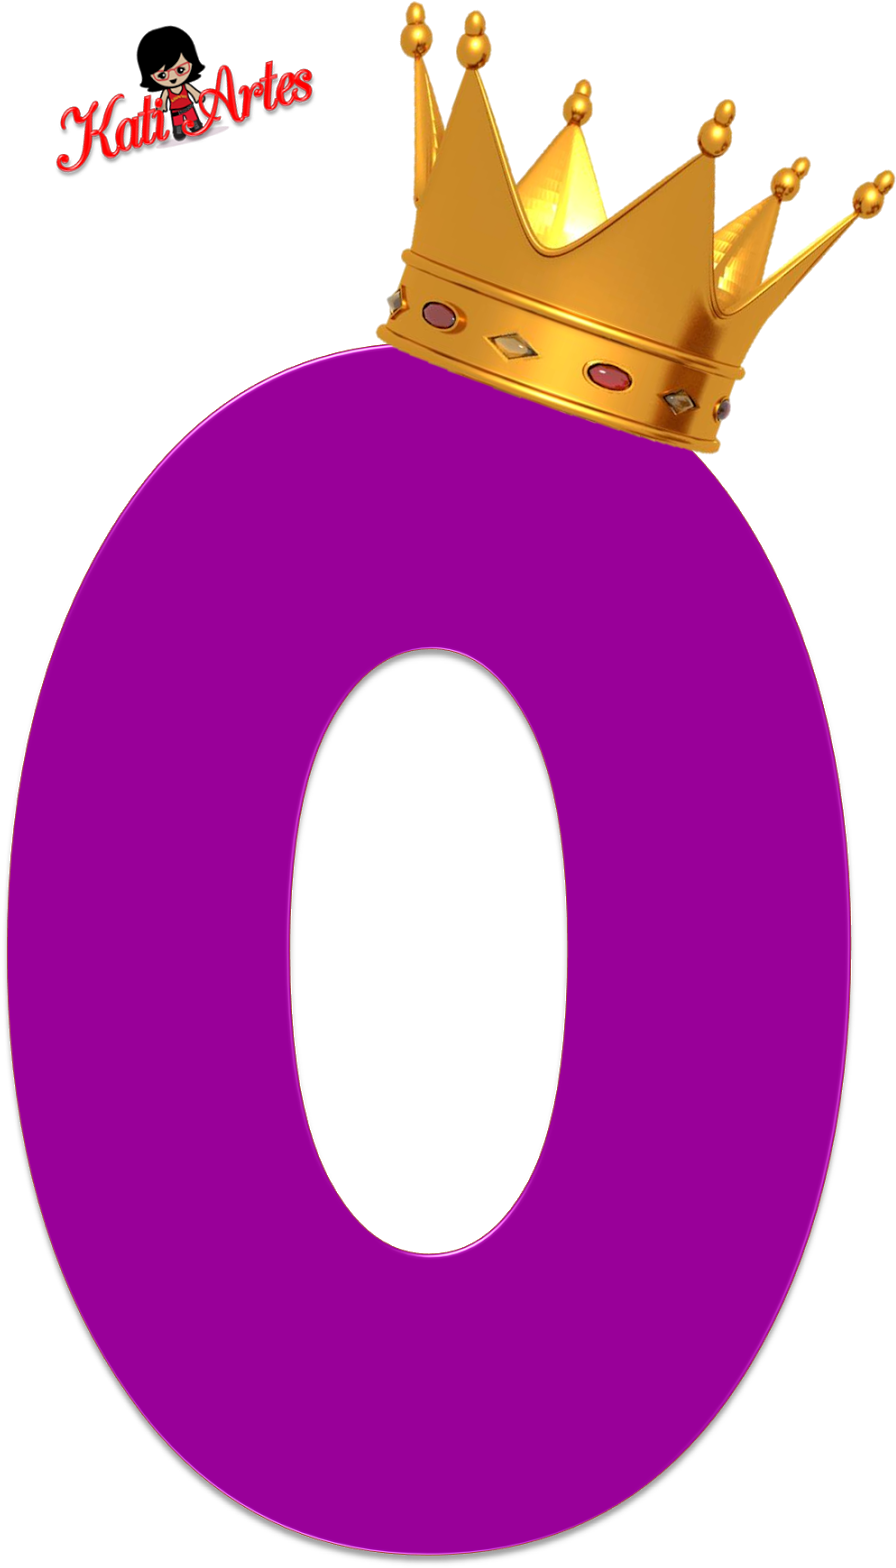 Royal Letter Owith Crown Graphic PNG